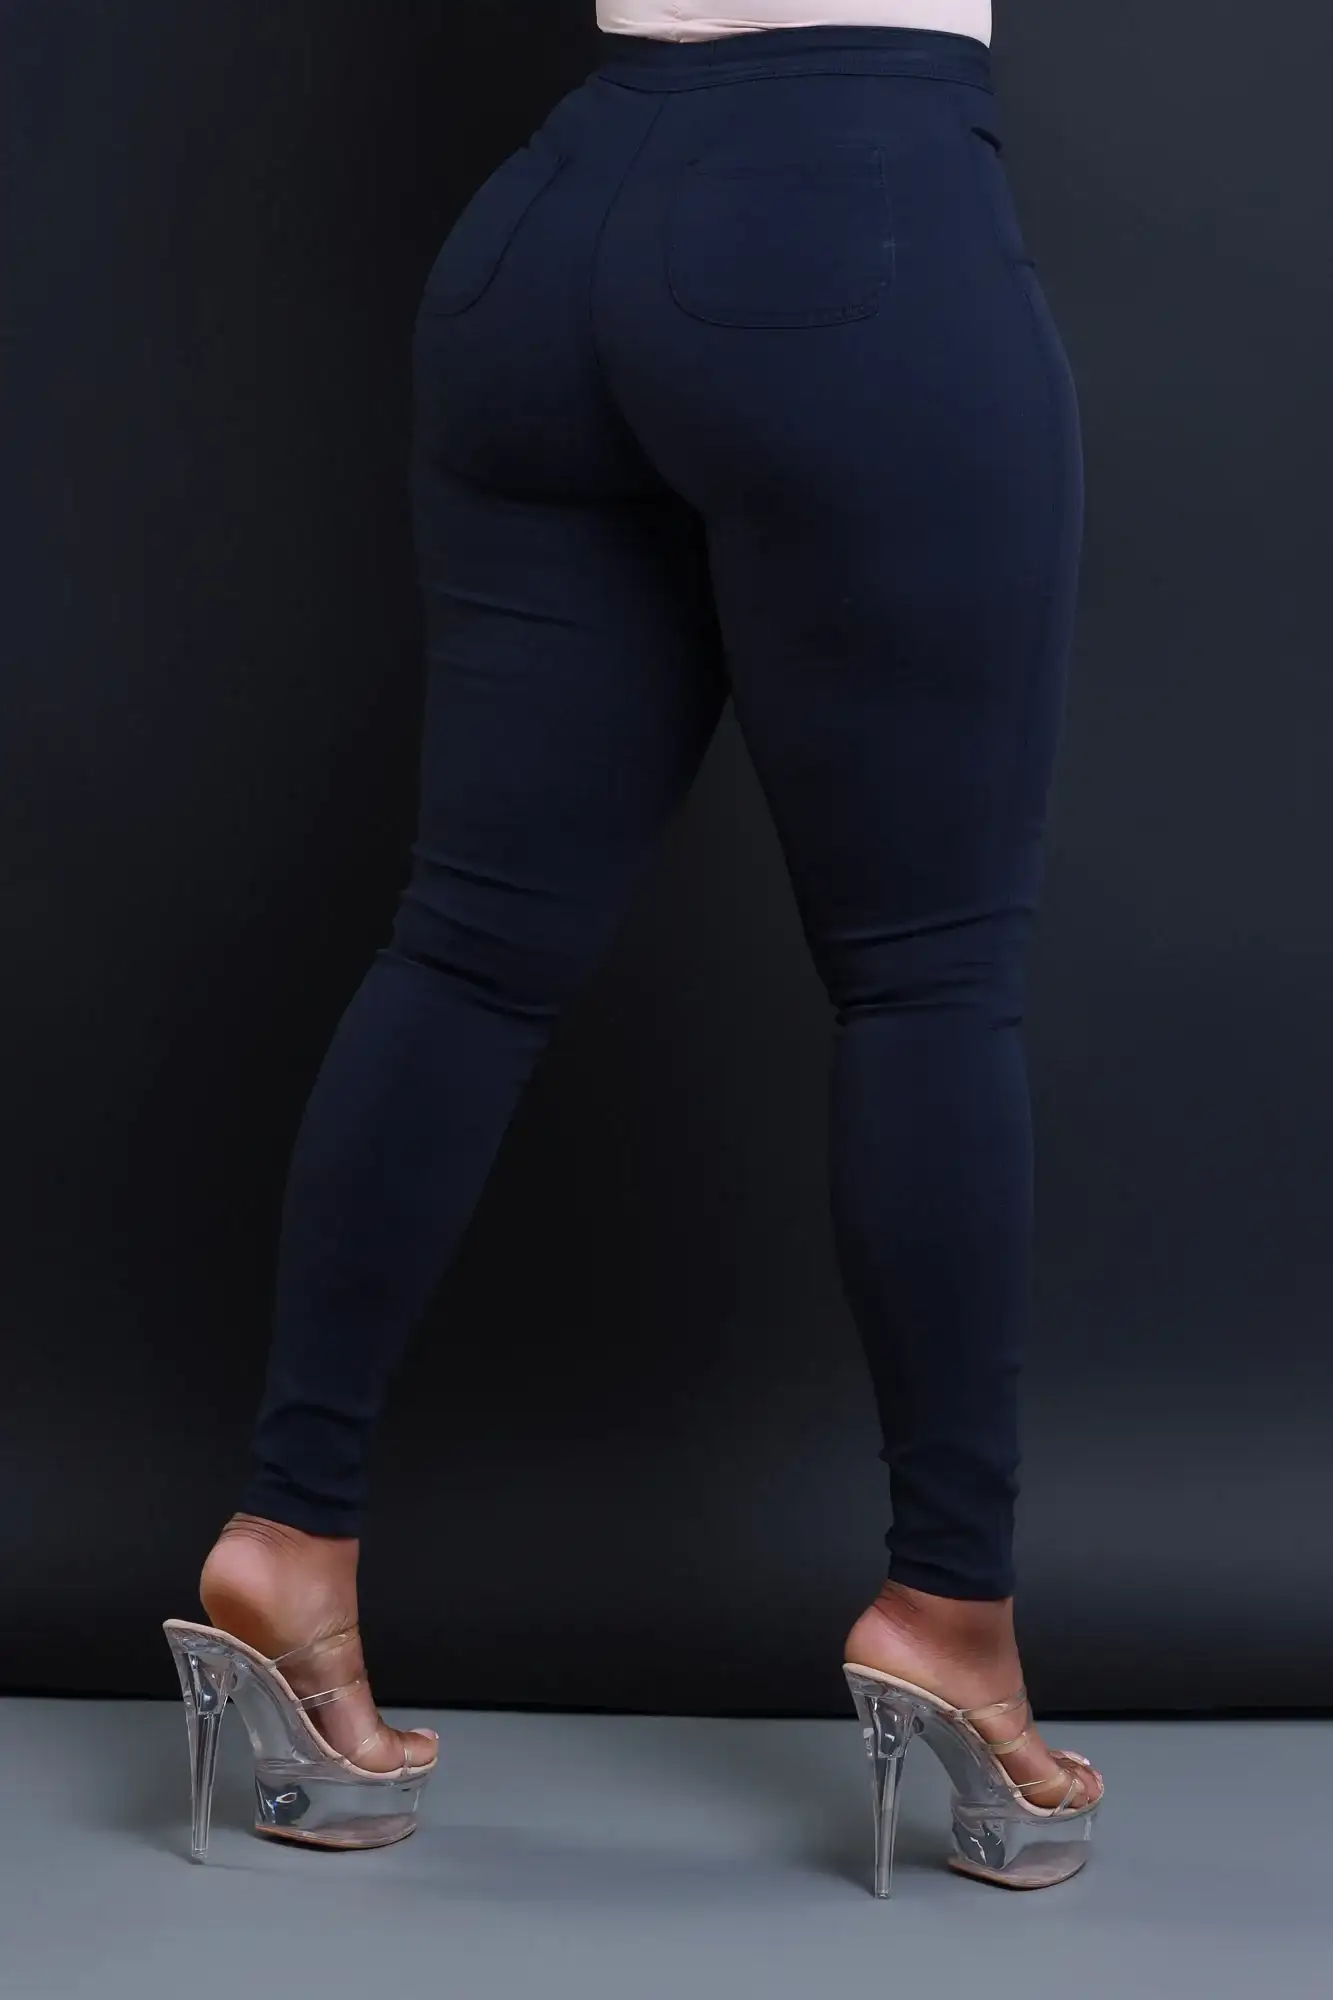 Image of Super Swank High Waist Stretchy Jeans - Navy Blue